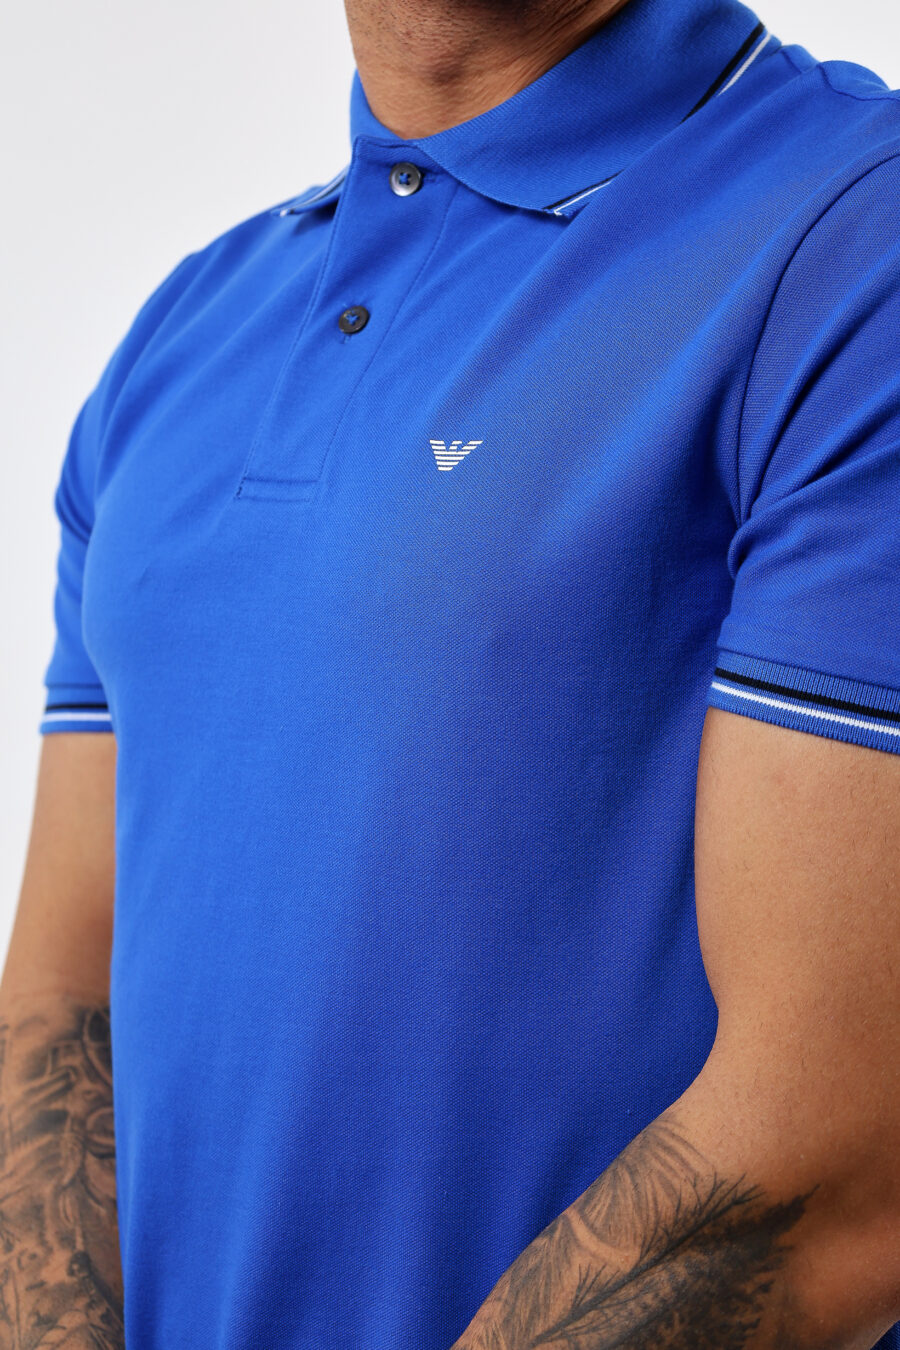 Blue knitted polo shirt with striped collar and mini eagle logo - BLS Fashion 57